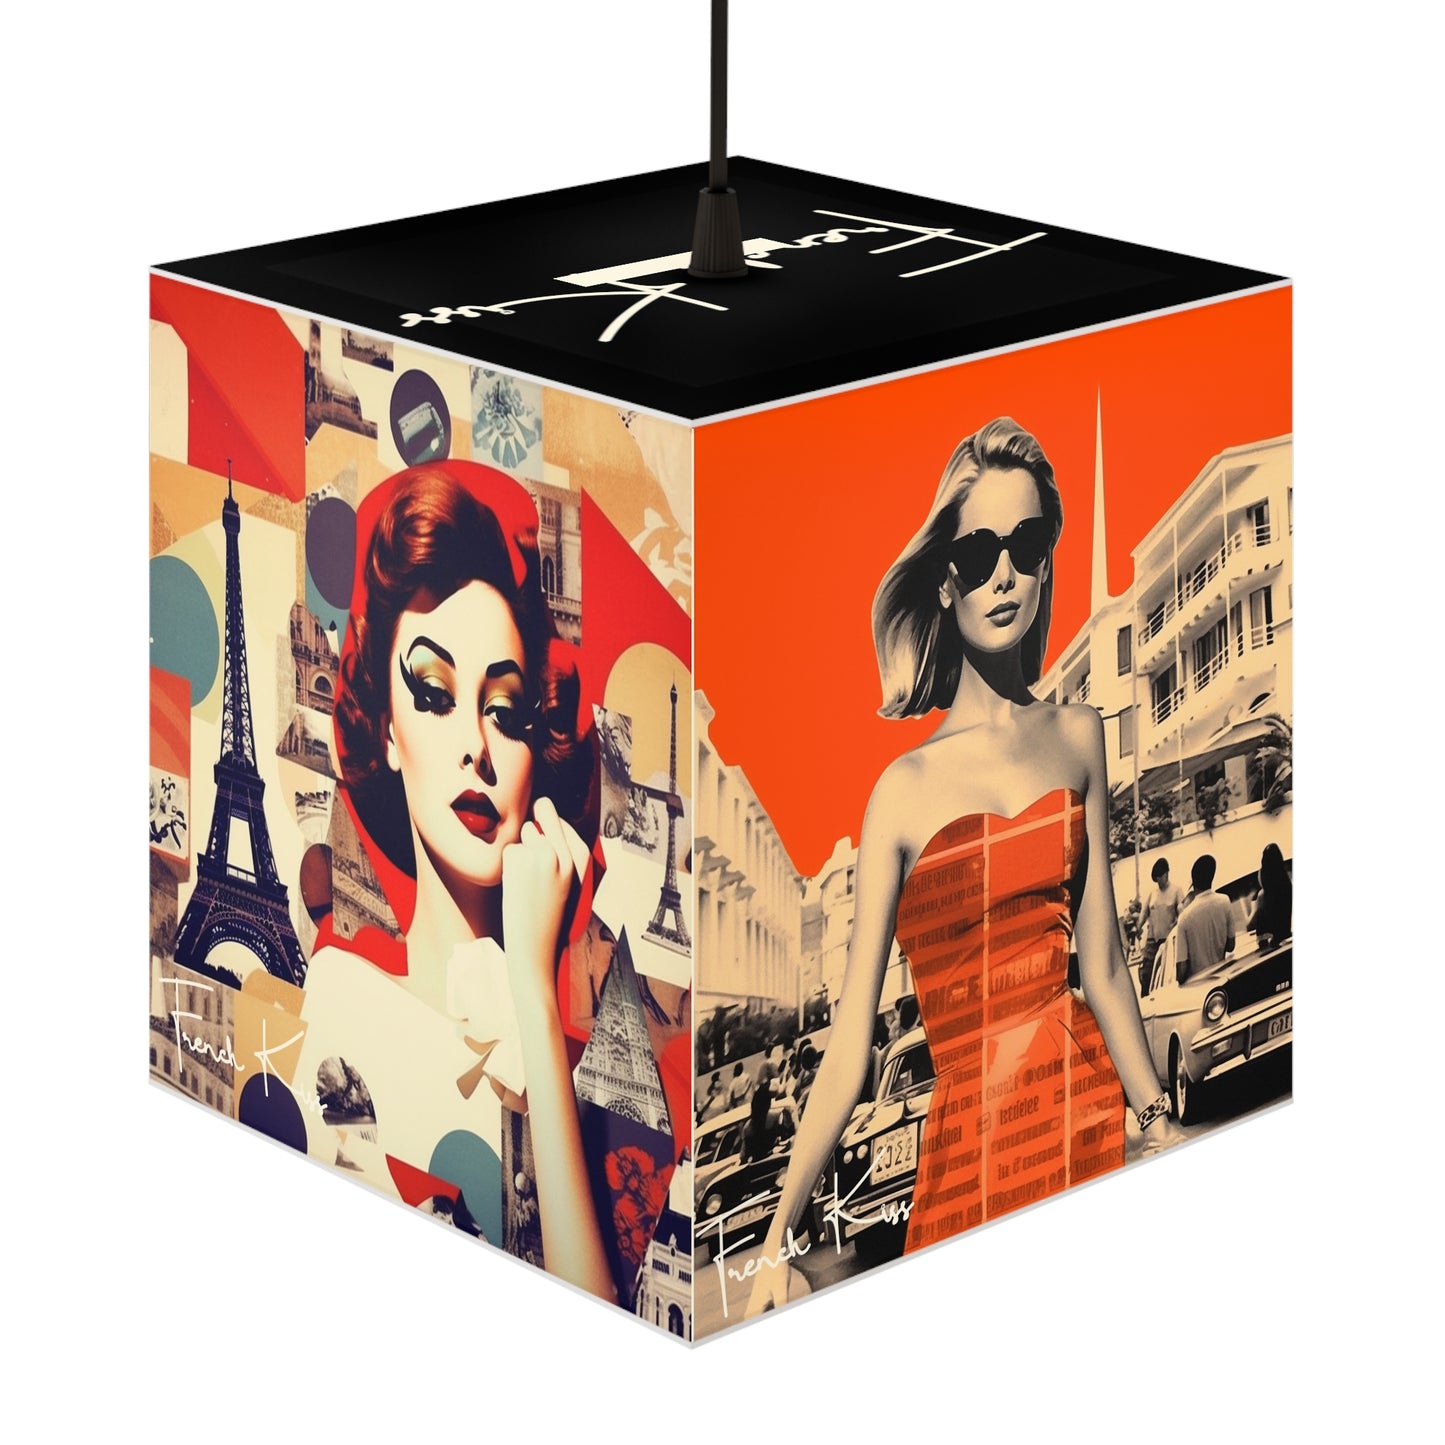 ALLUME Sexy Chic Light Cube Lamp, French Kiss Glamour Lifestyle Fashion Haute Couture Travel Pop Art Interior Designer Luxe Luxury